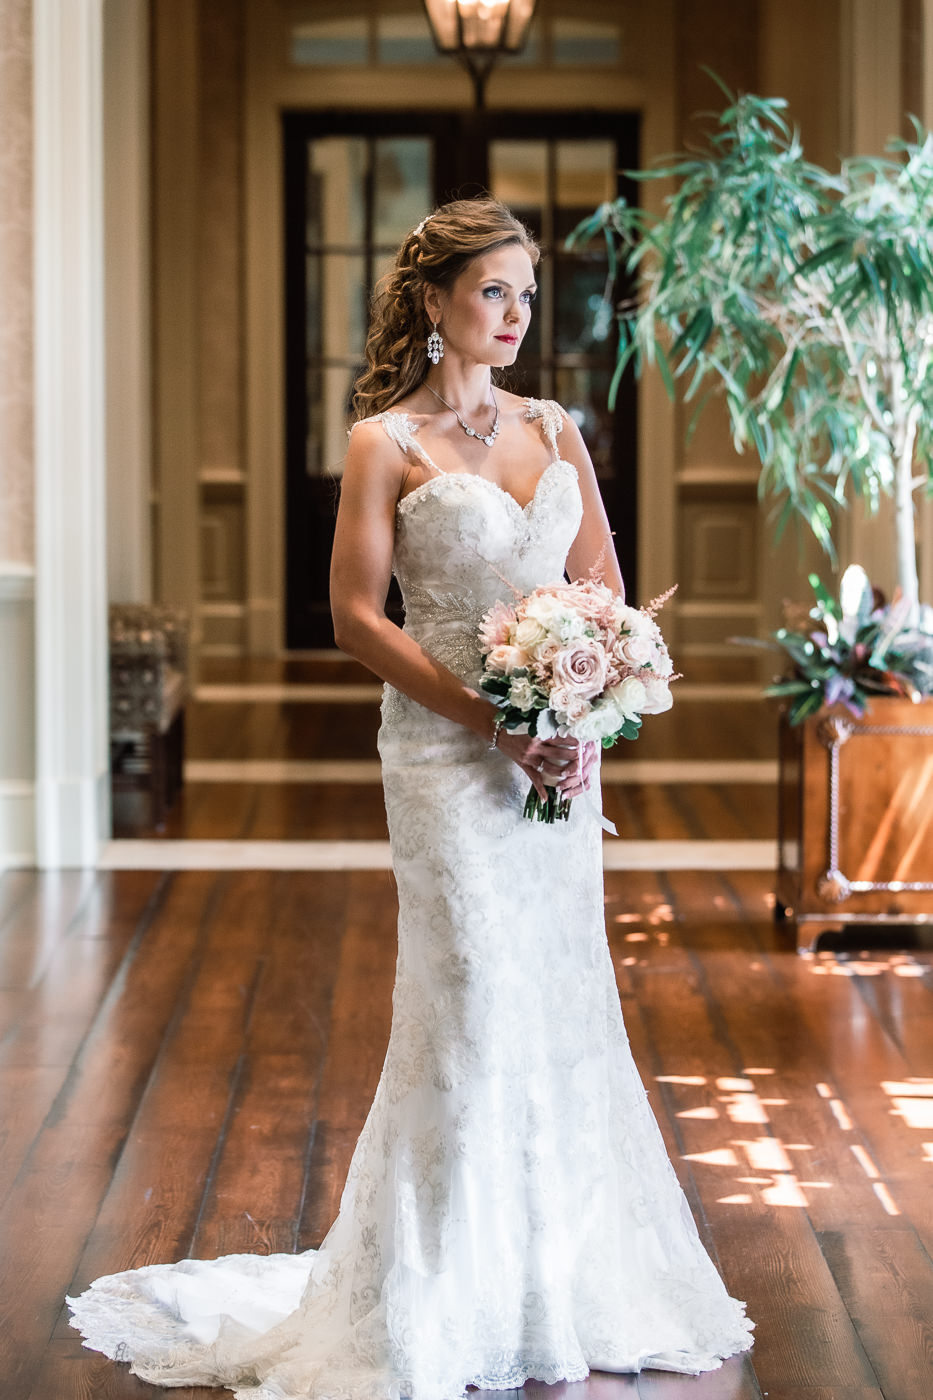 classic wedding photo style - traditional wedding photography styles - Nort Carolina wedding photographers - Chris lang Photography  